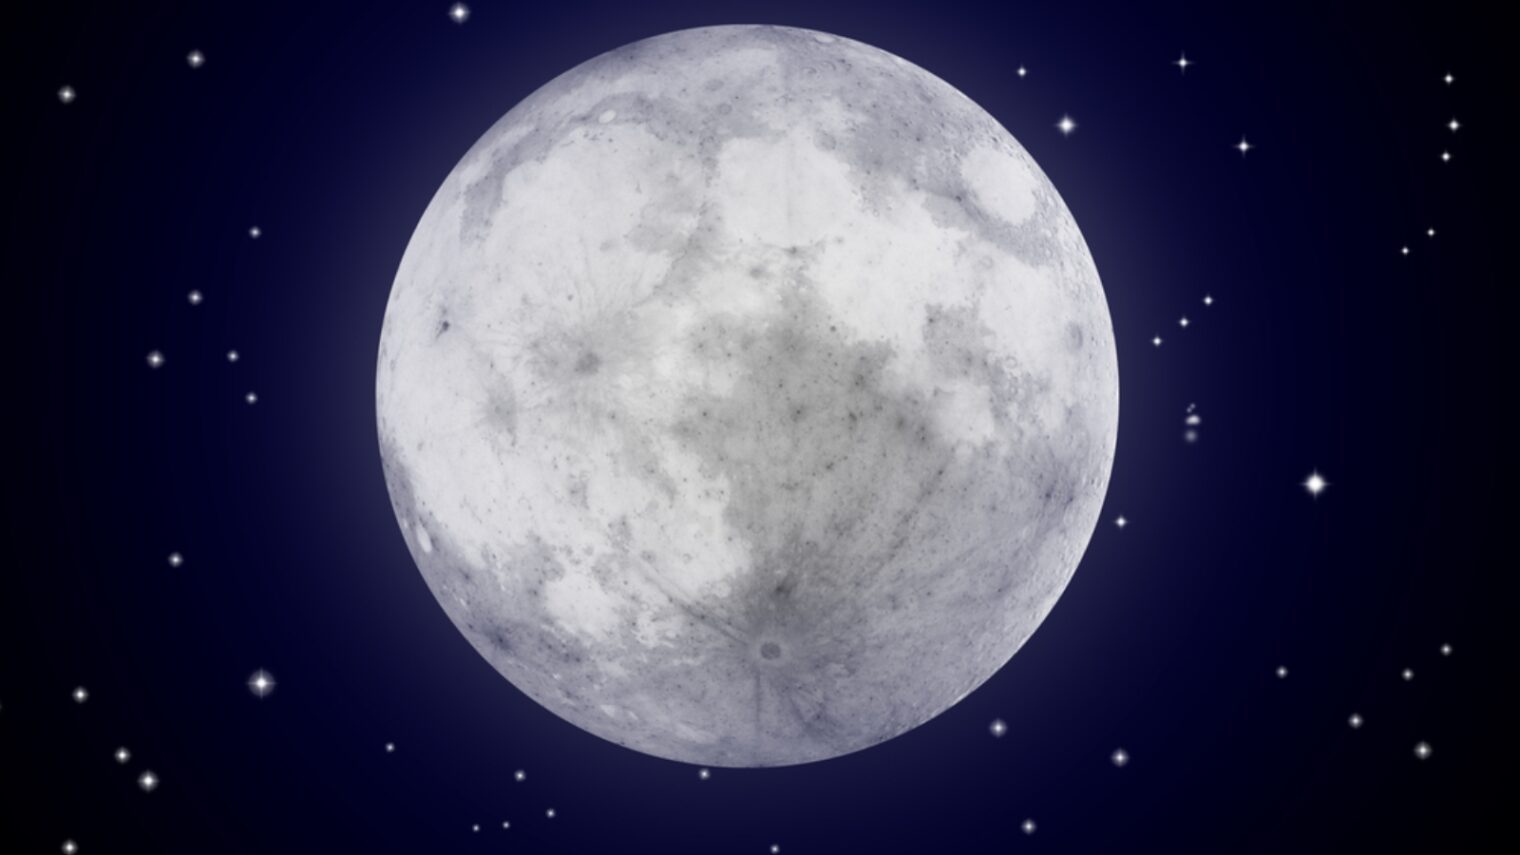 SpaceIL is in the final race to the moon. Image via Shutterstock.com